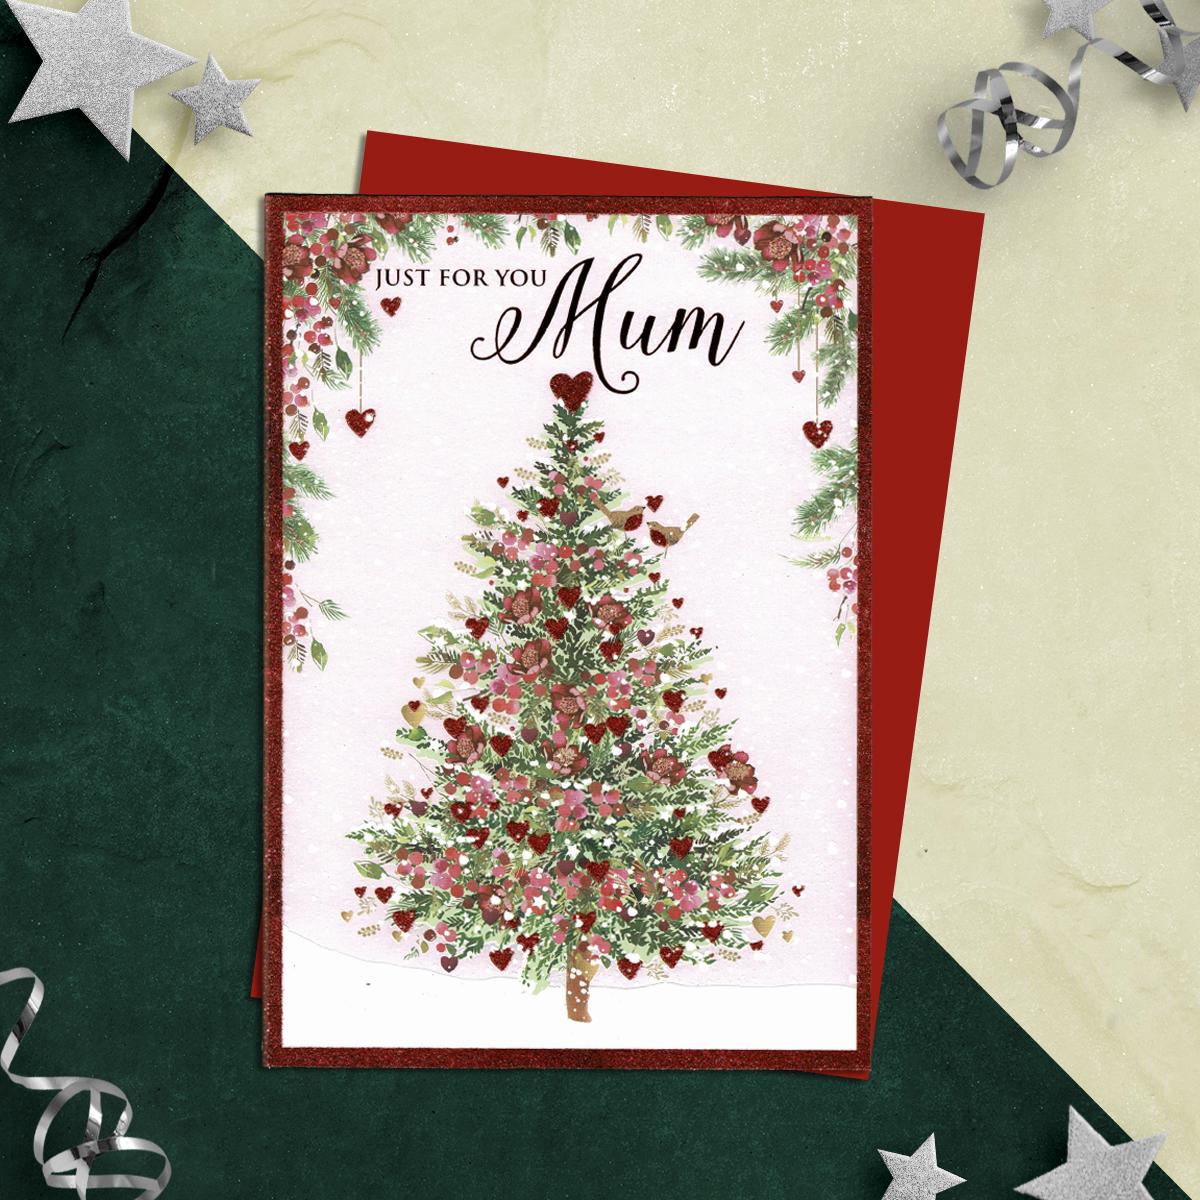 Just For You Mum Featuring A Beautiful Christmas Tree Decorated With Hearts.Finished With Red Foil Detail, Added Glitter, Red Envelope And Printed Insert